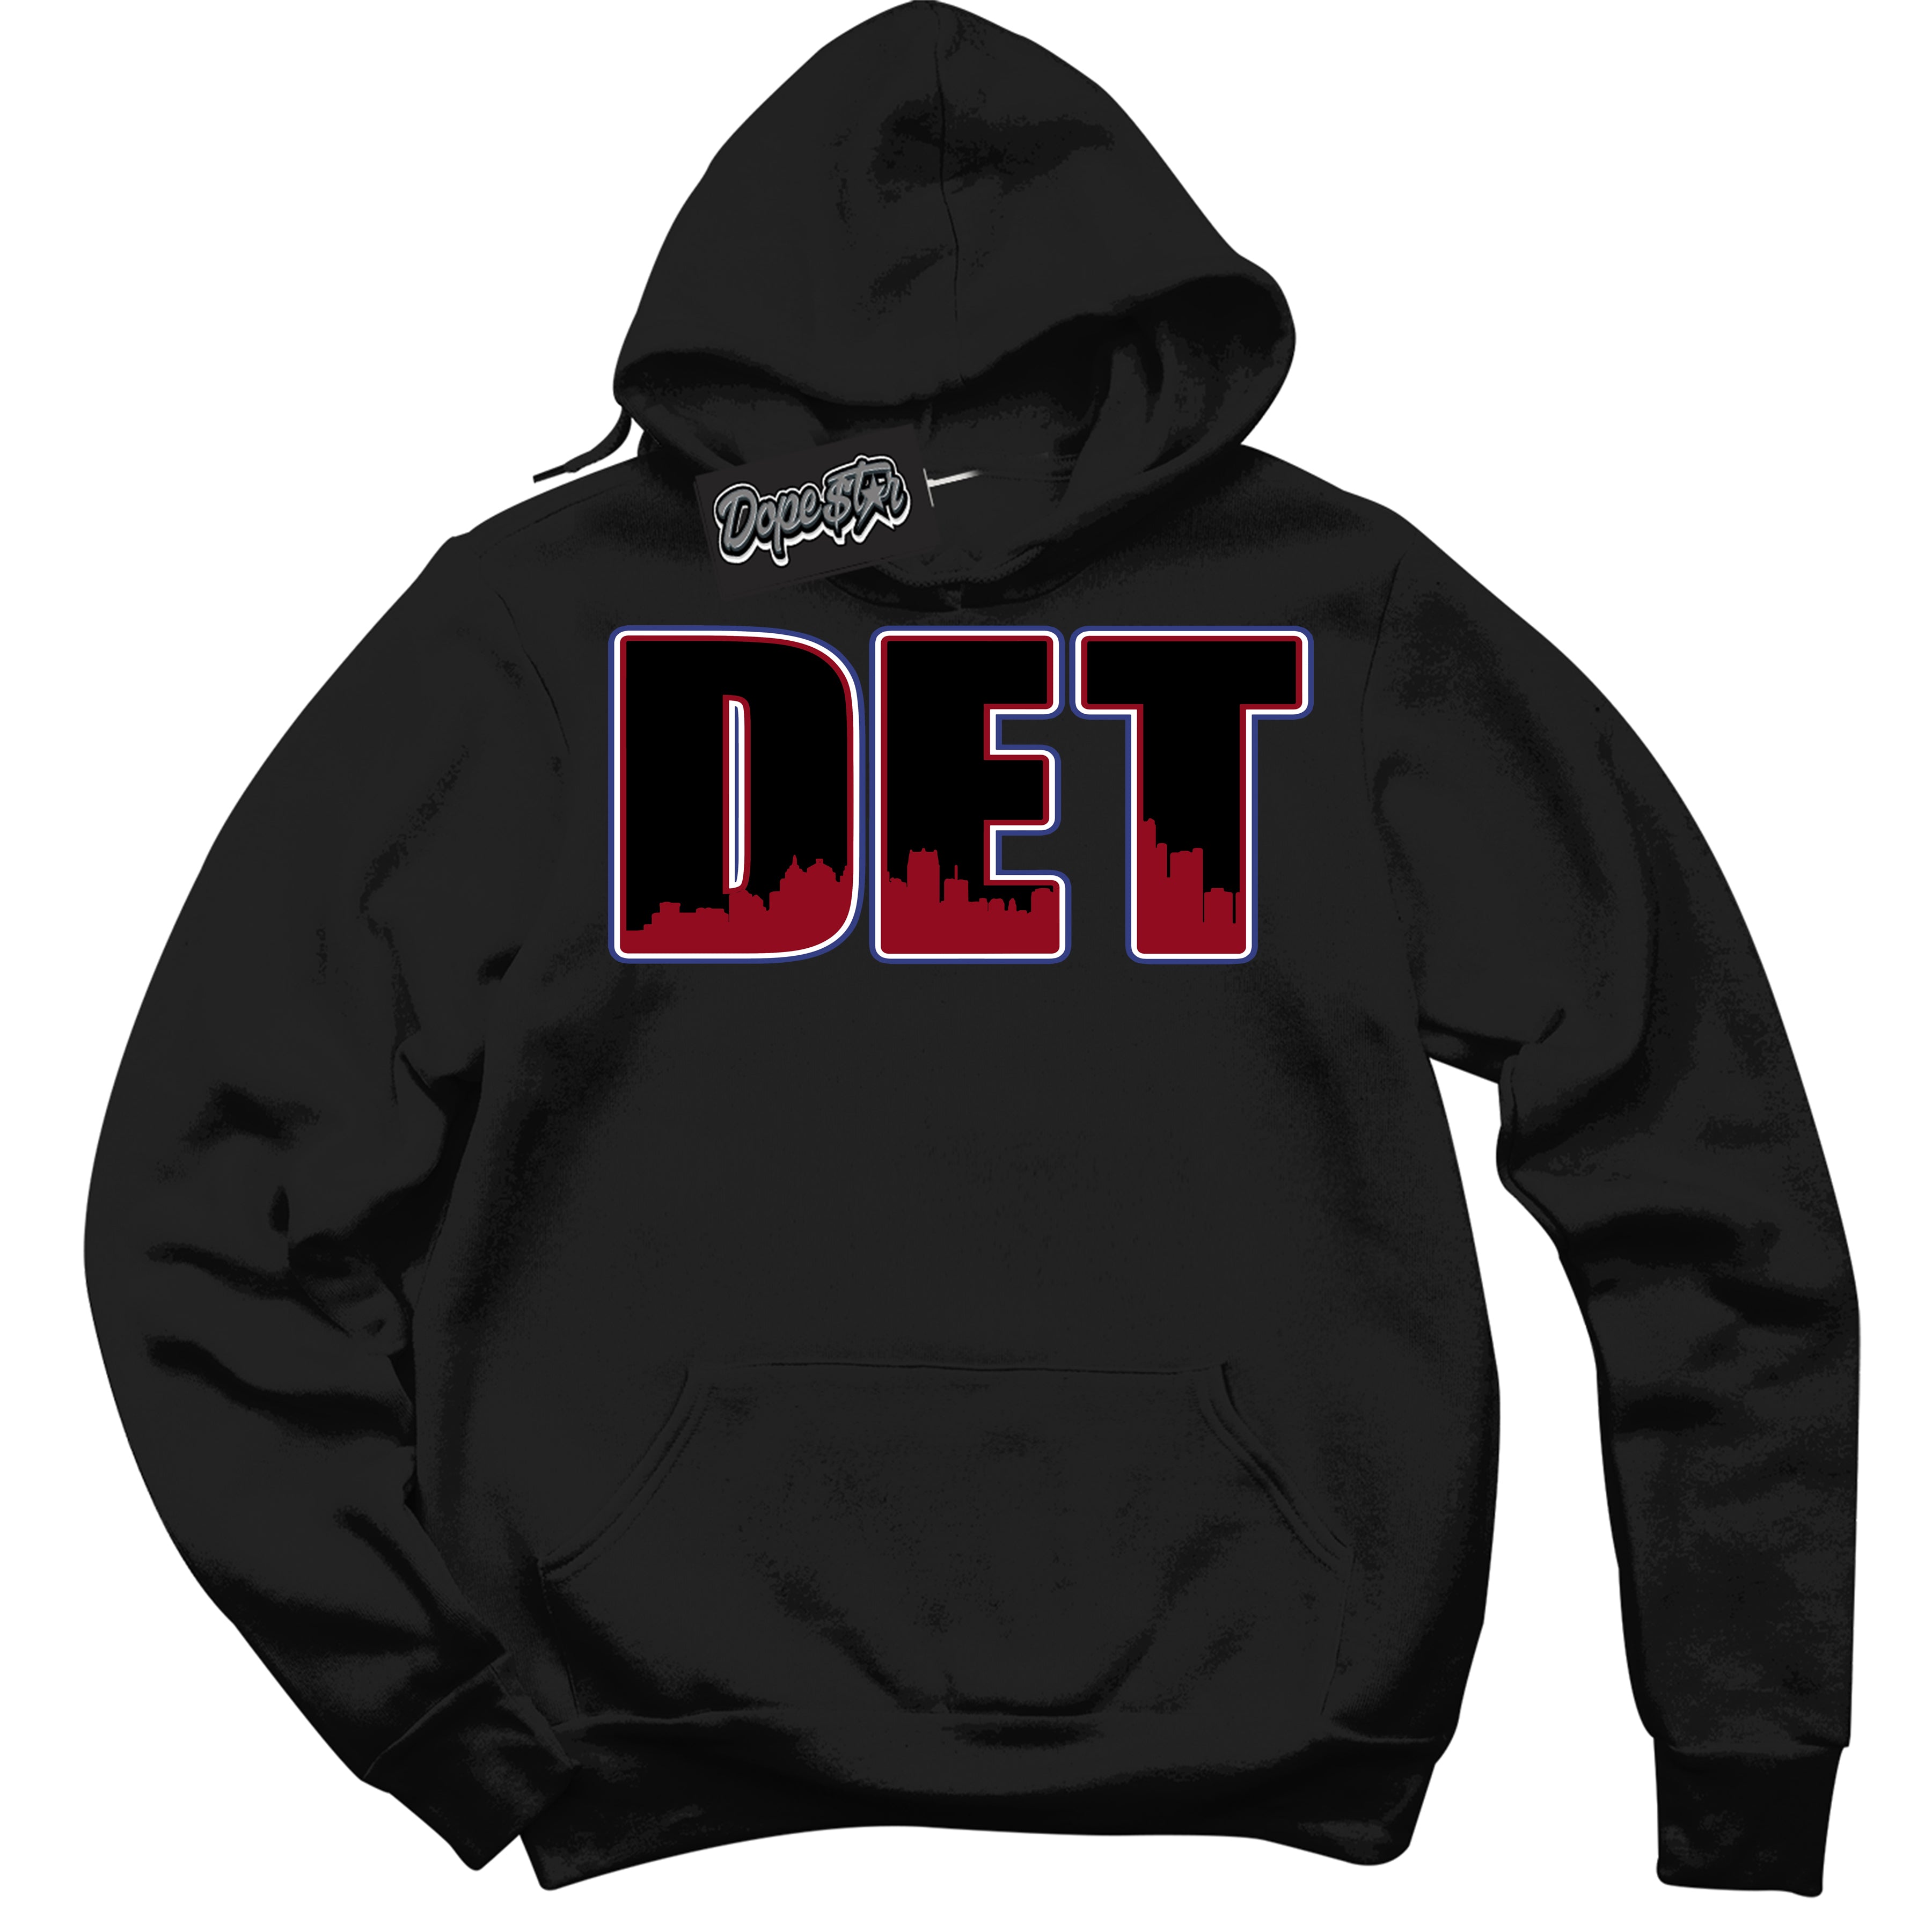 Cool Black Hoodie with “ Detroit ”  design that Perfectly Matches Playoffs 8s Sneakers.